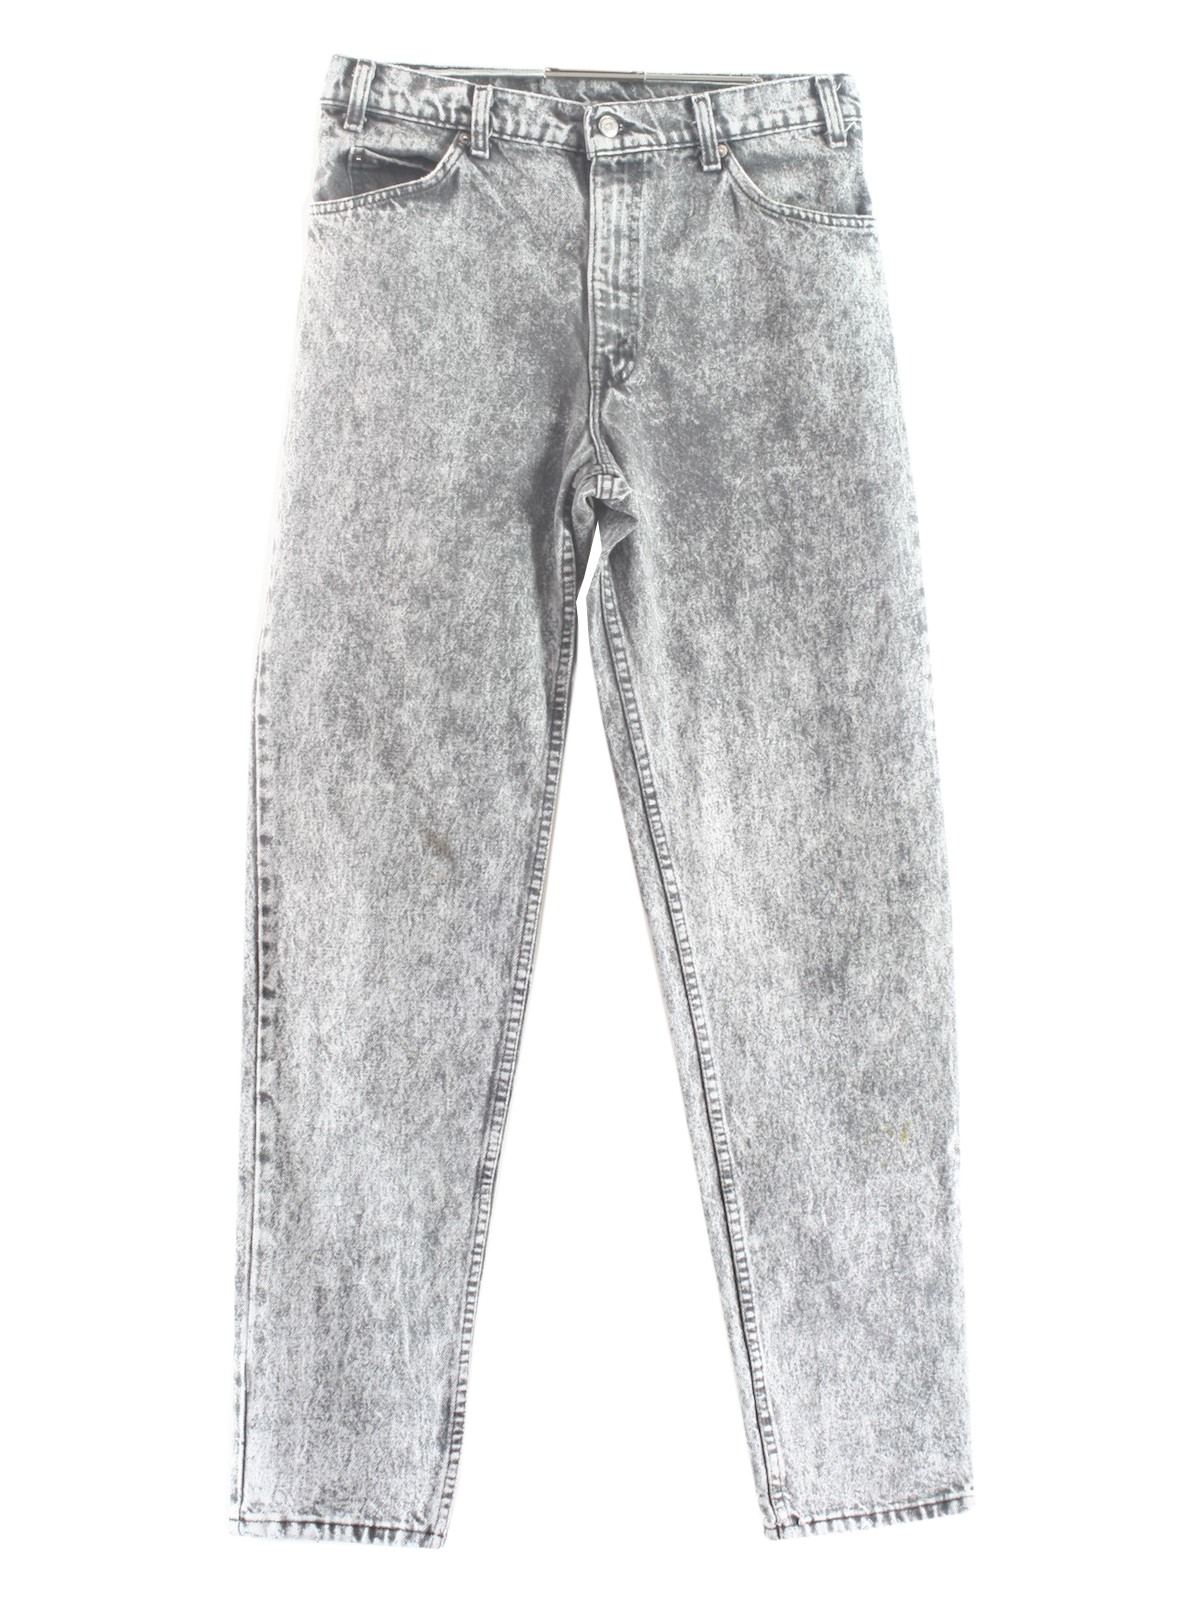 1980's Retro Pants: 80s -Levis- Mens grey and white stone washed cotton ...